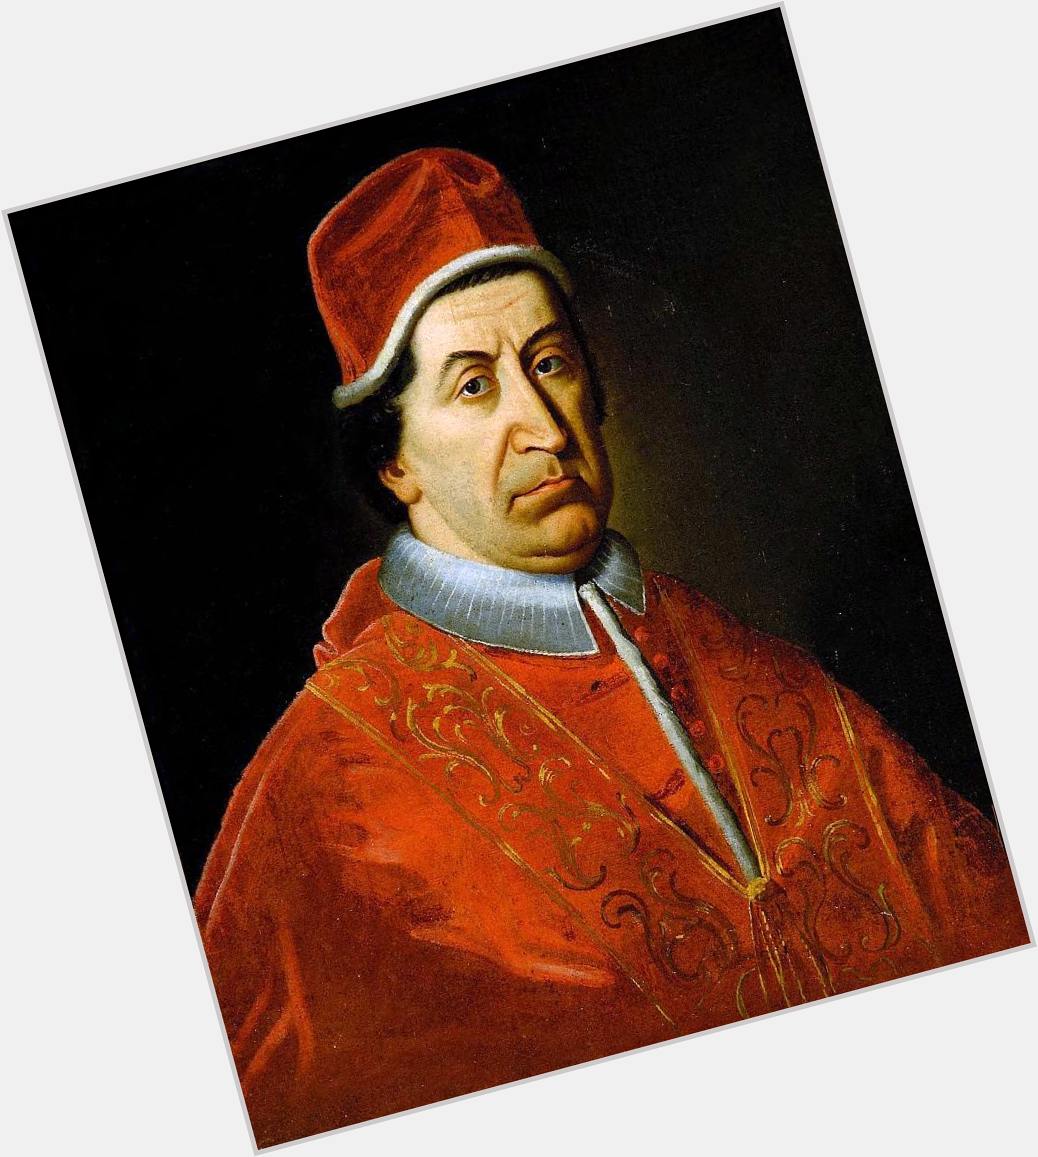 Pope Clement Xi  light brown hair & hairstyles